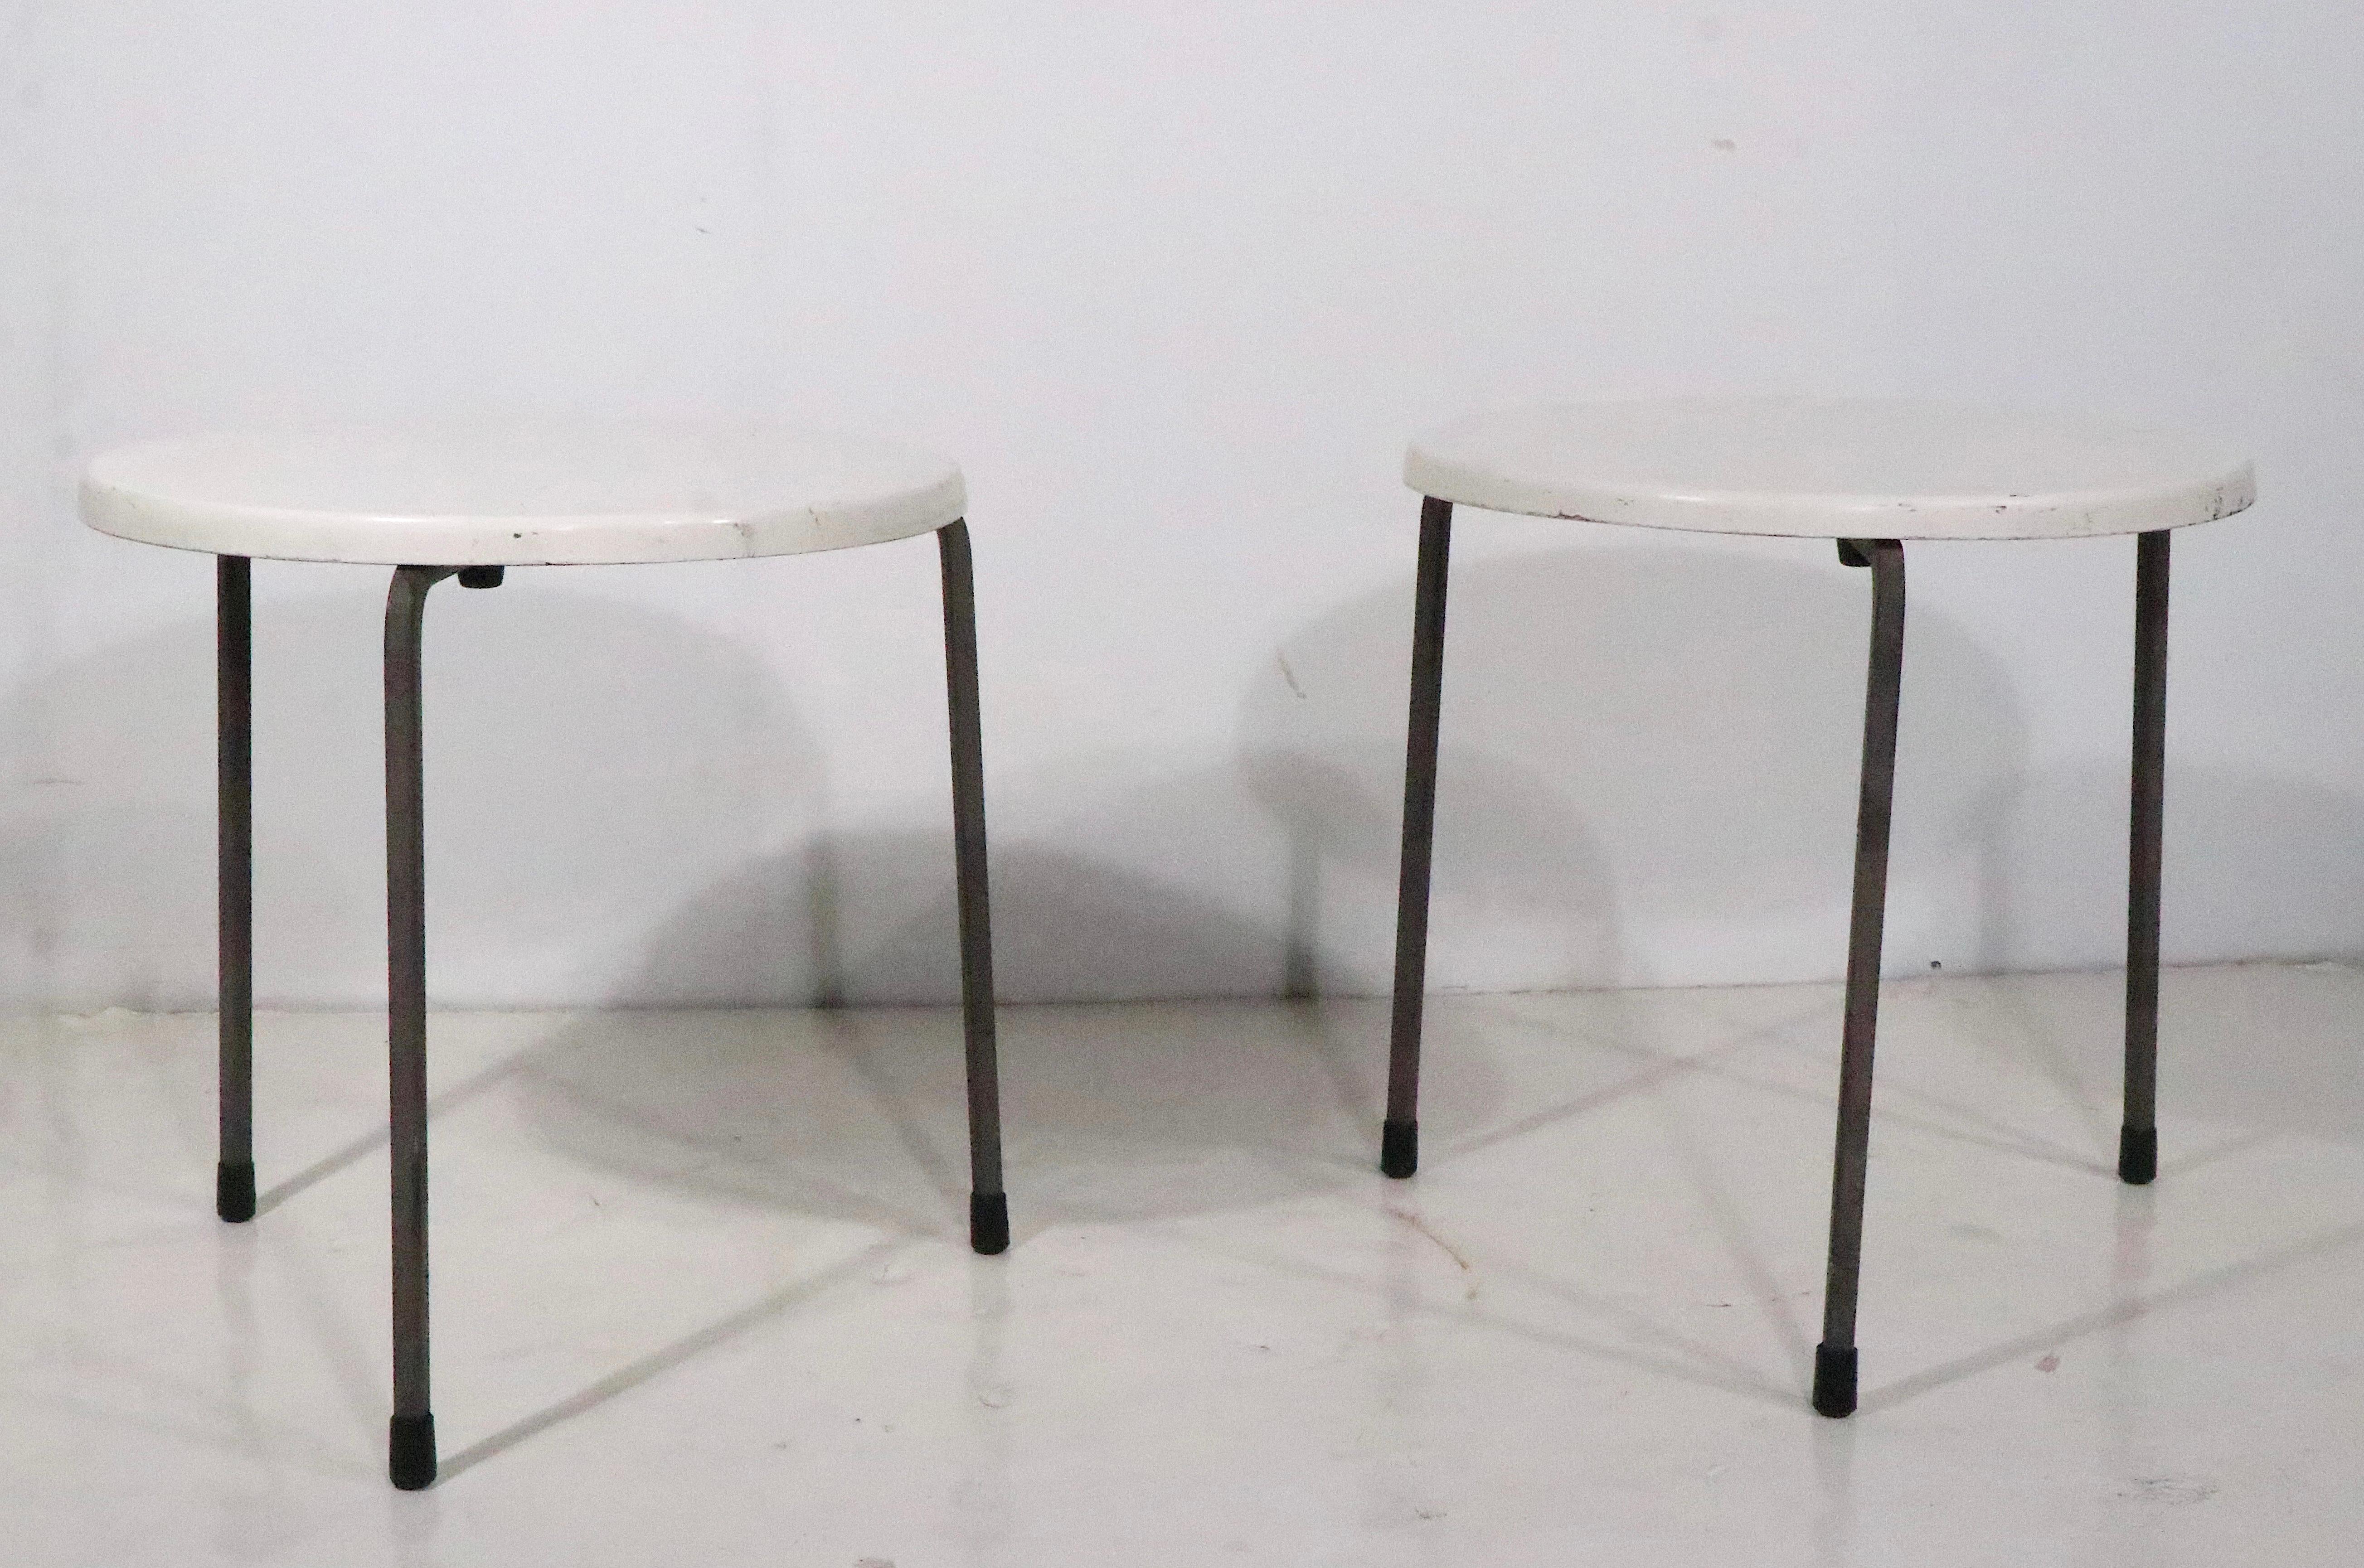 Pr.  Mid Century Patio Poolside Tables by Fibreform Made in Florida c.1950/1970s For Sale 1